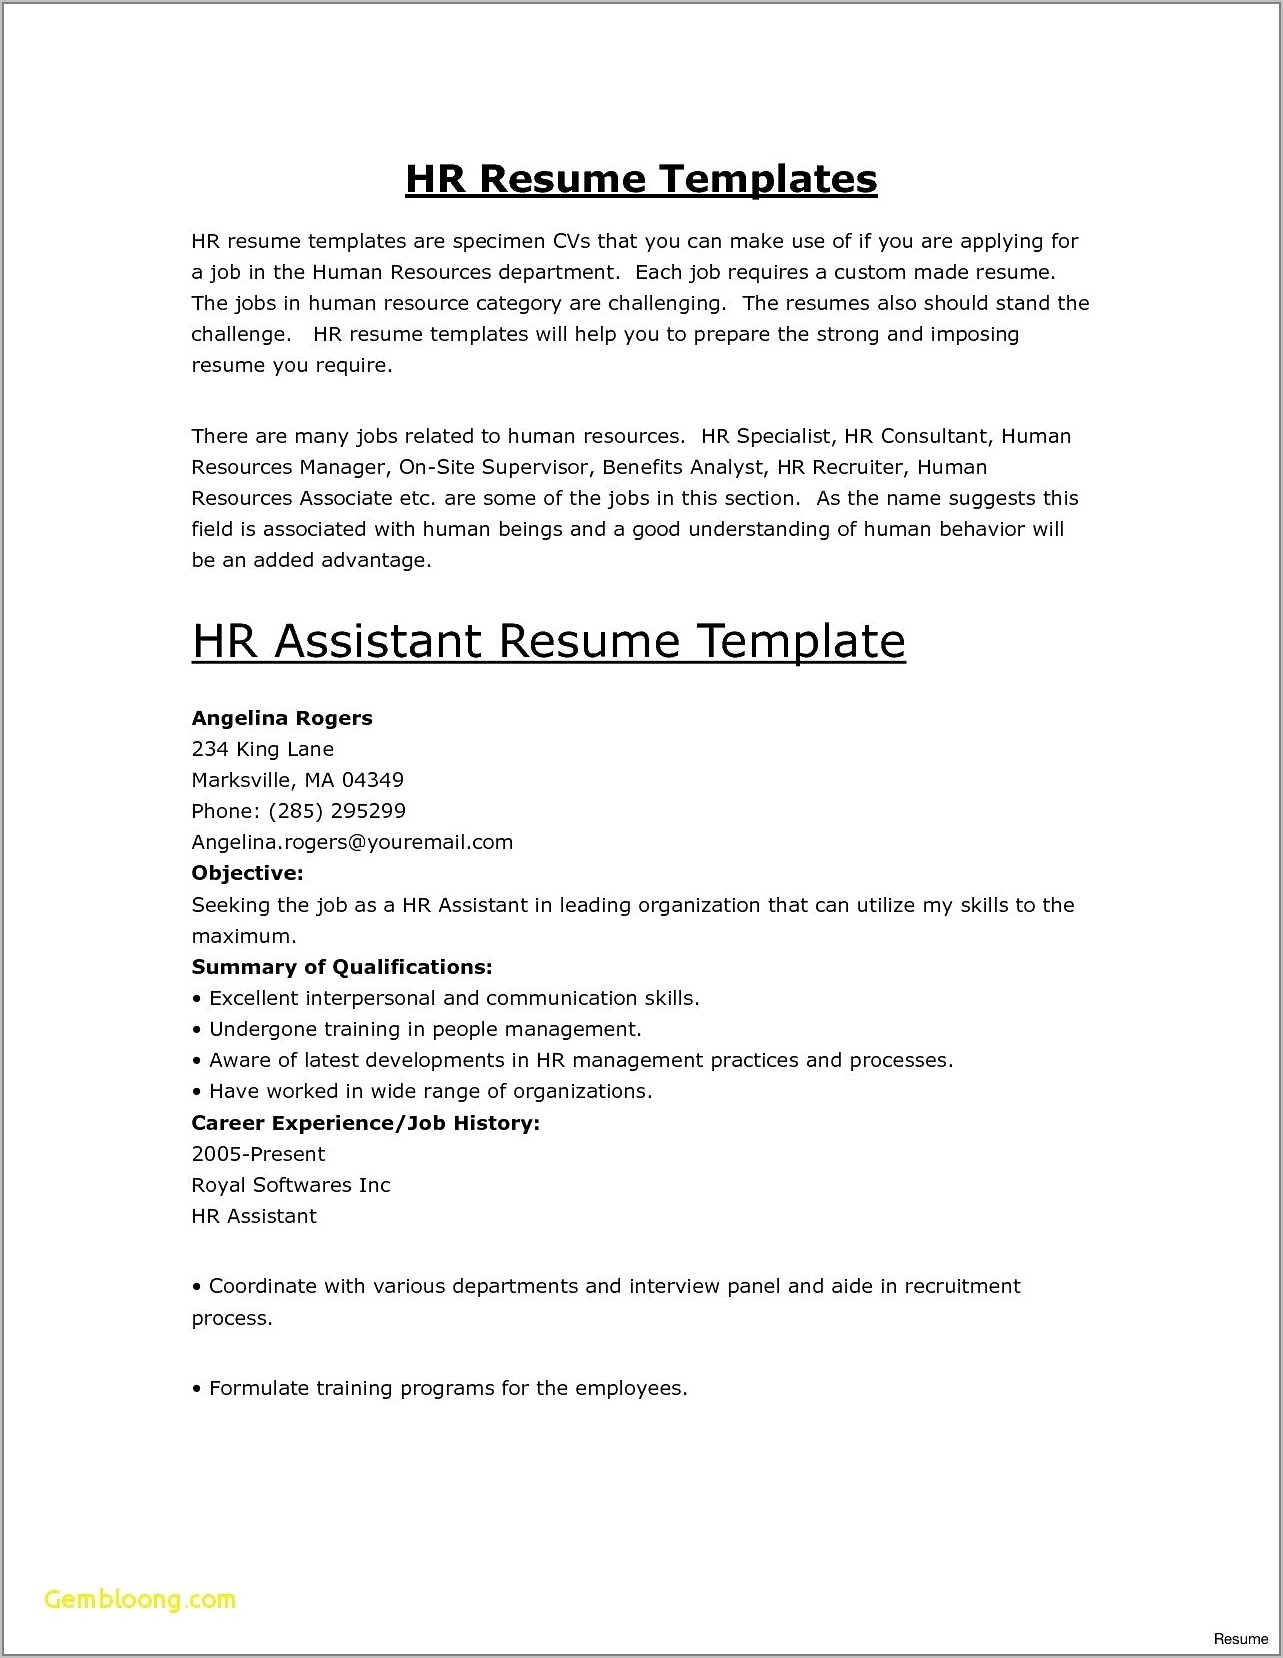 Top Rated Resume Builder